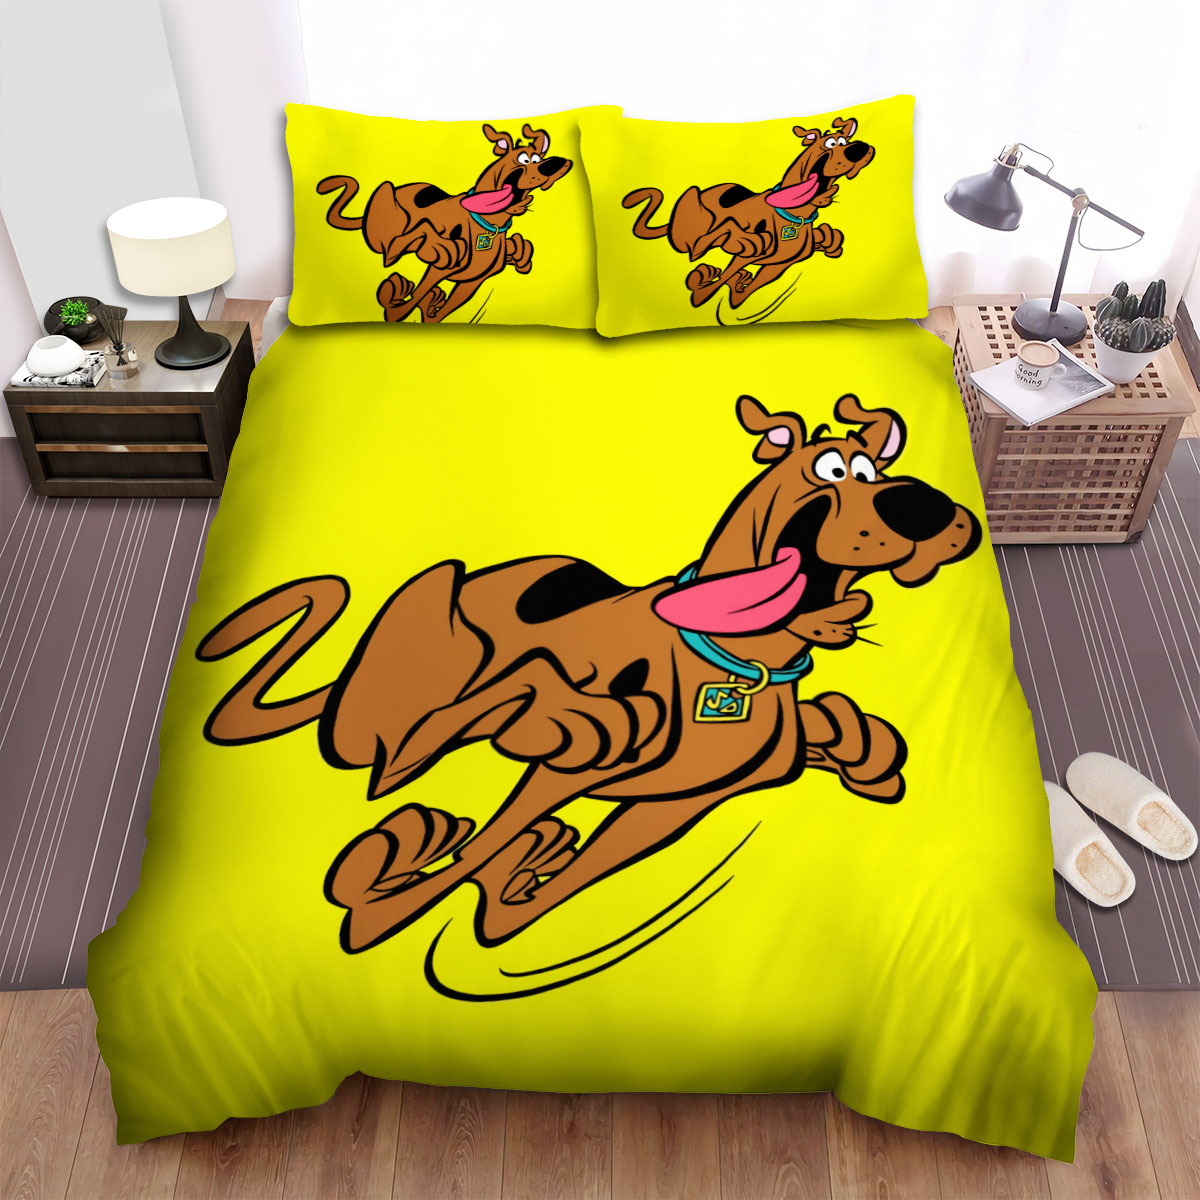 Scooby Doo Bedding Set The Scooby-Doo Show Running Duvet Covers Yellow Unique Gift